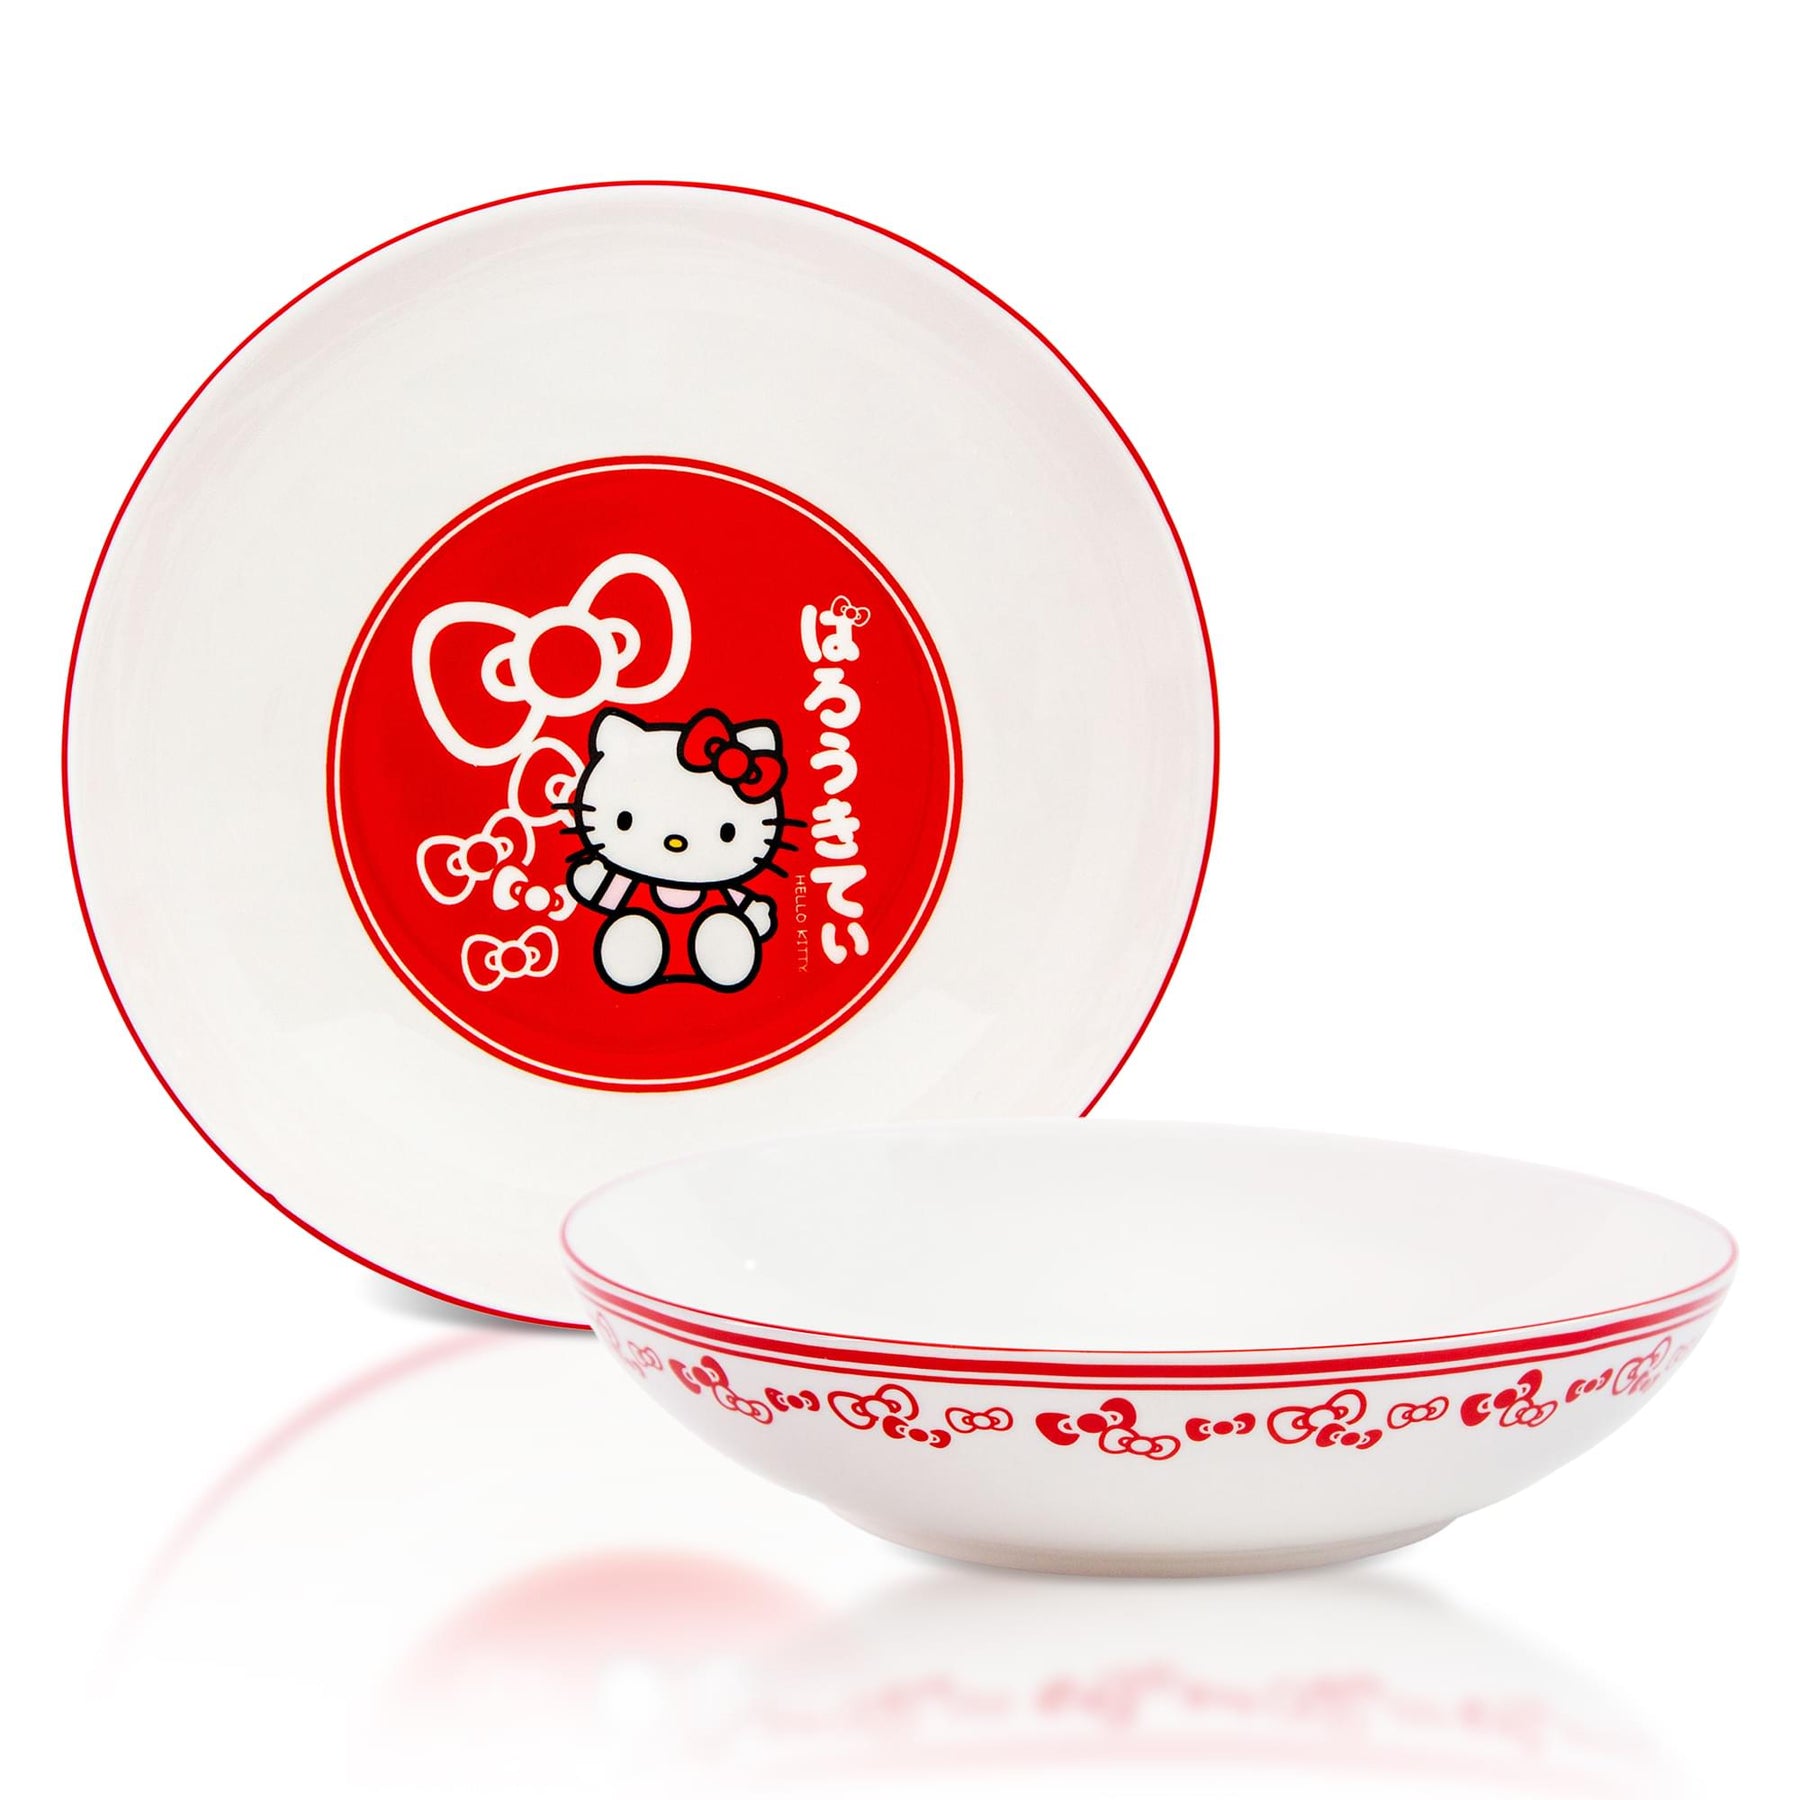 Sanrio Hello Kitty Red Bows 9-Inch Ceramic Coupe Dinner Bowl